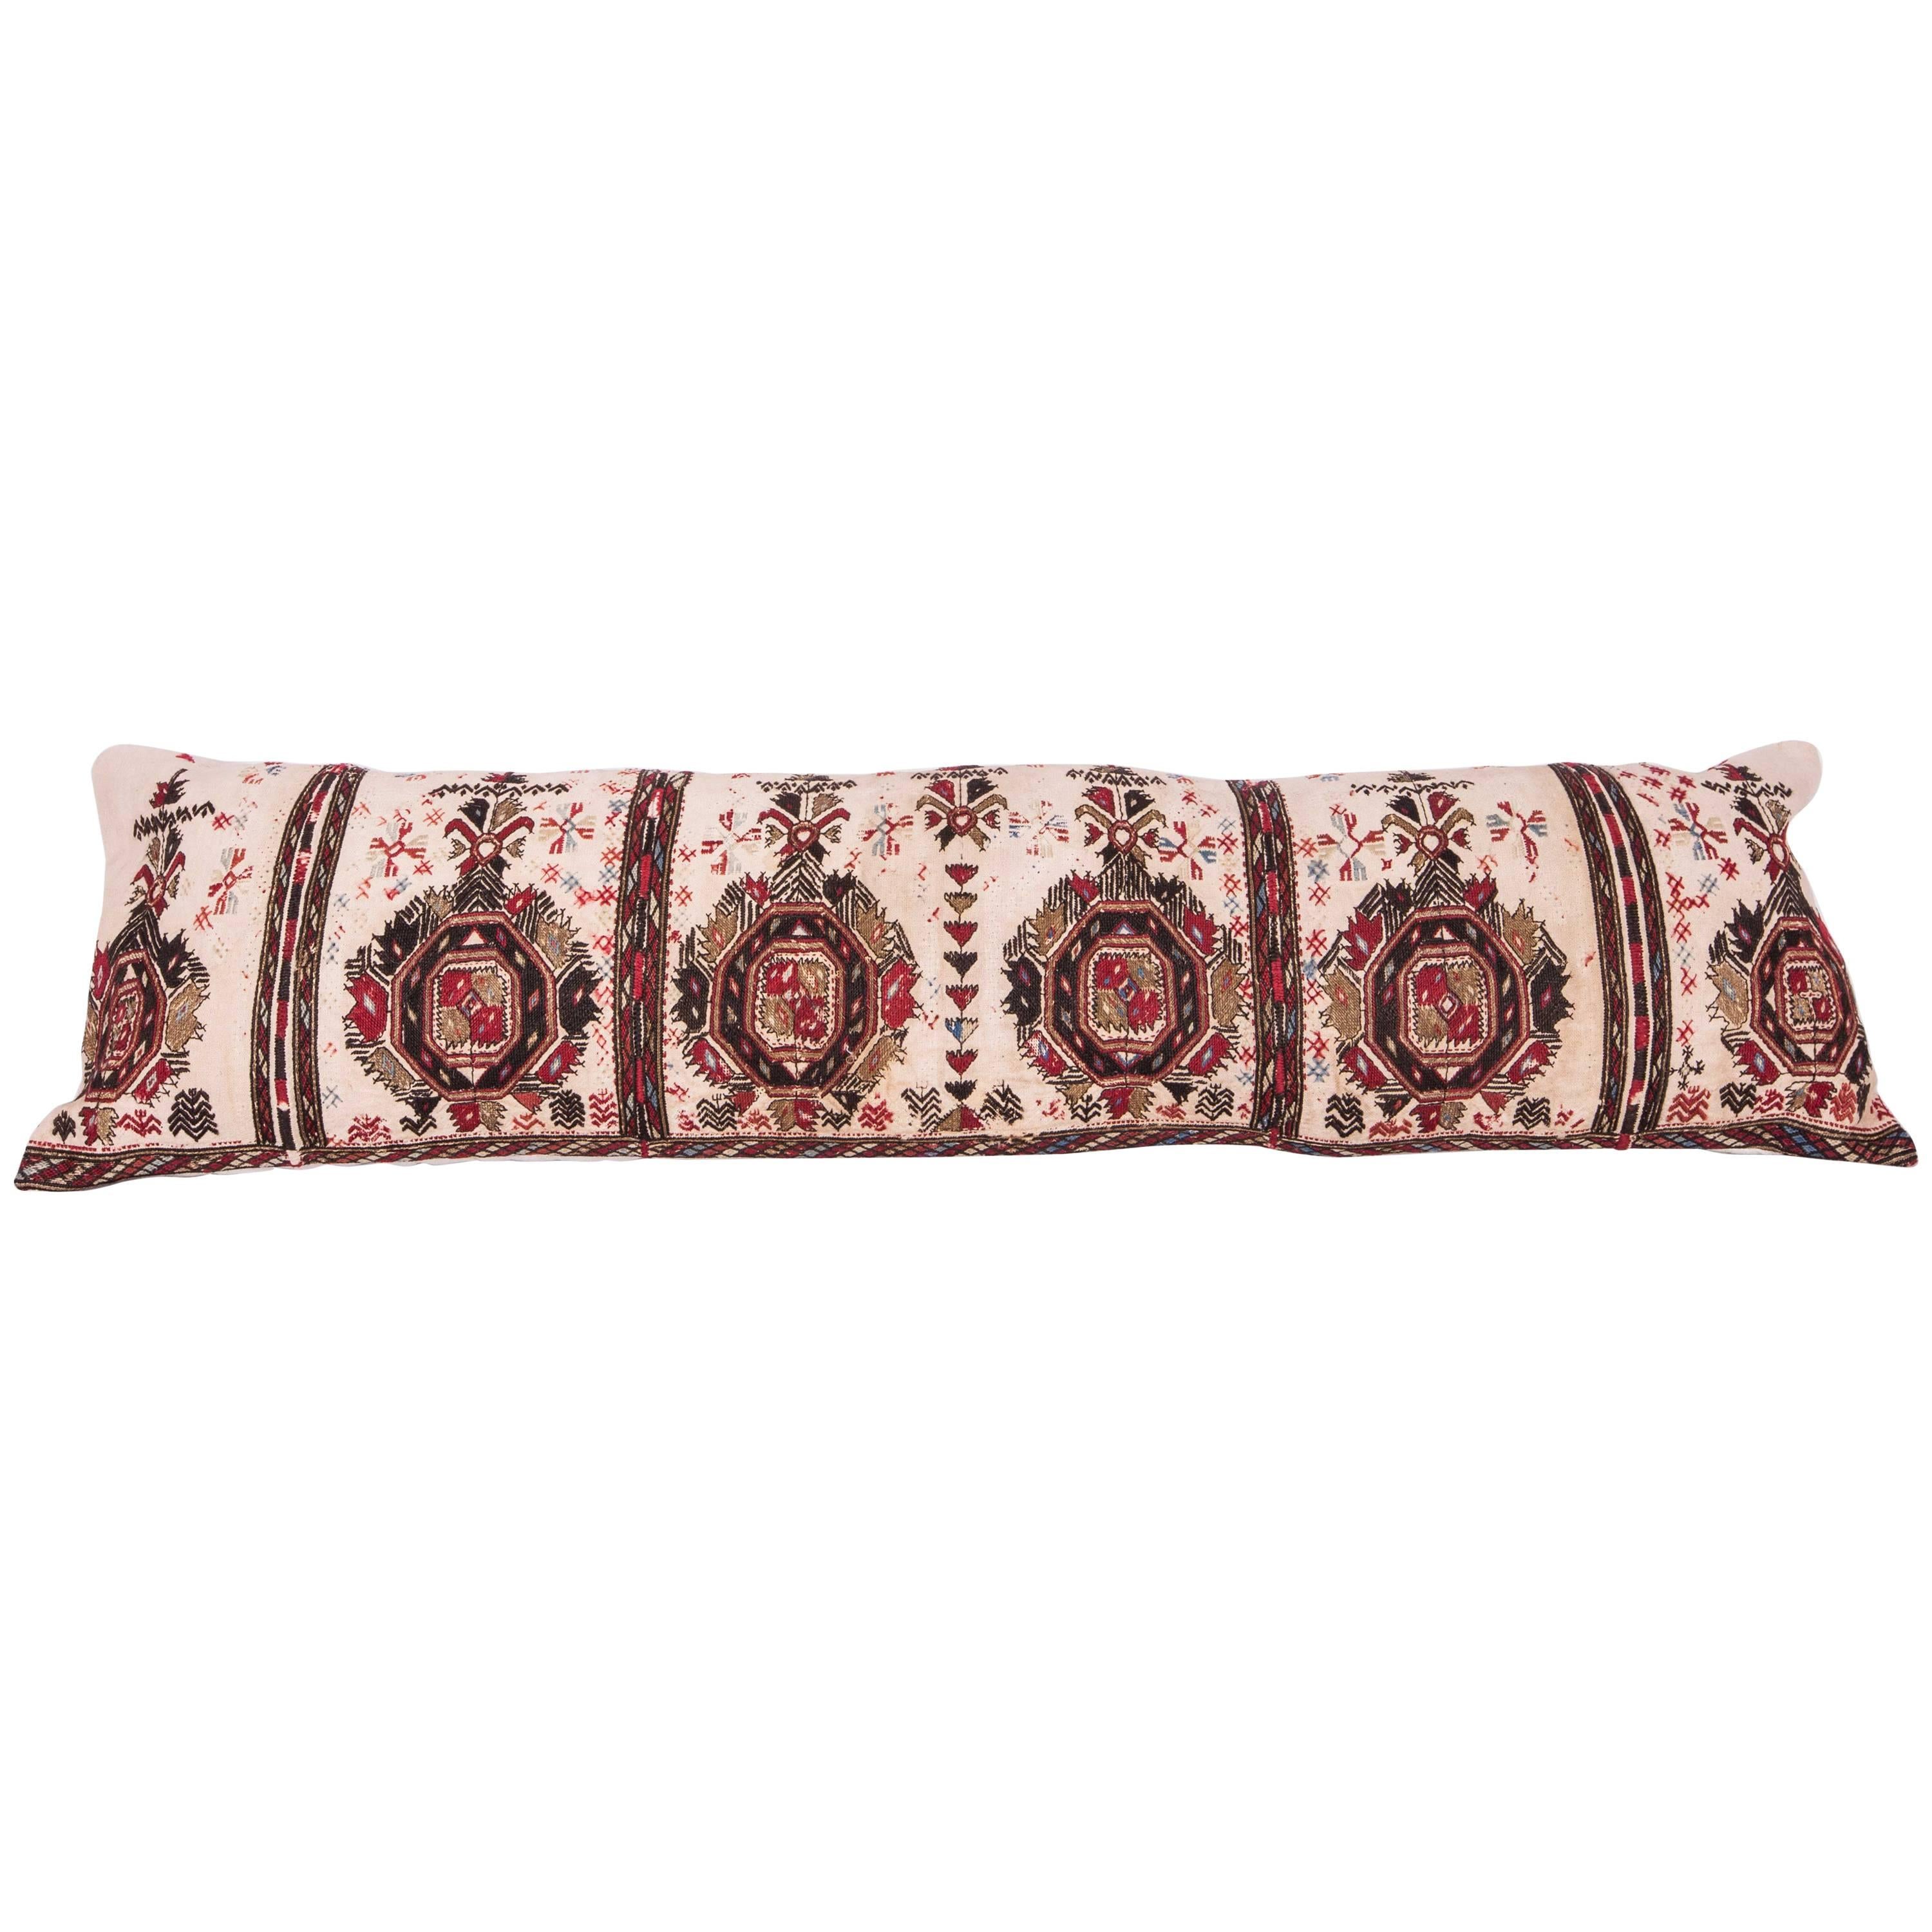 Long Antique Pillow Case Made from a 19th Century Macedonian Greek Embroidery